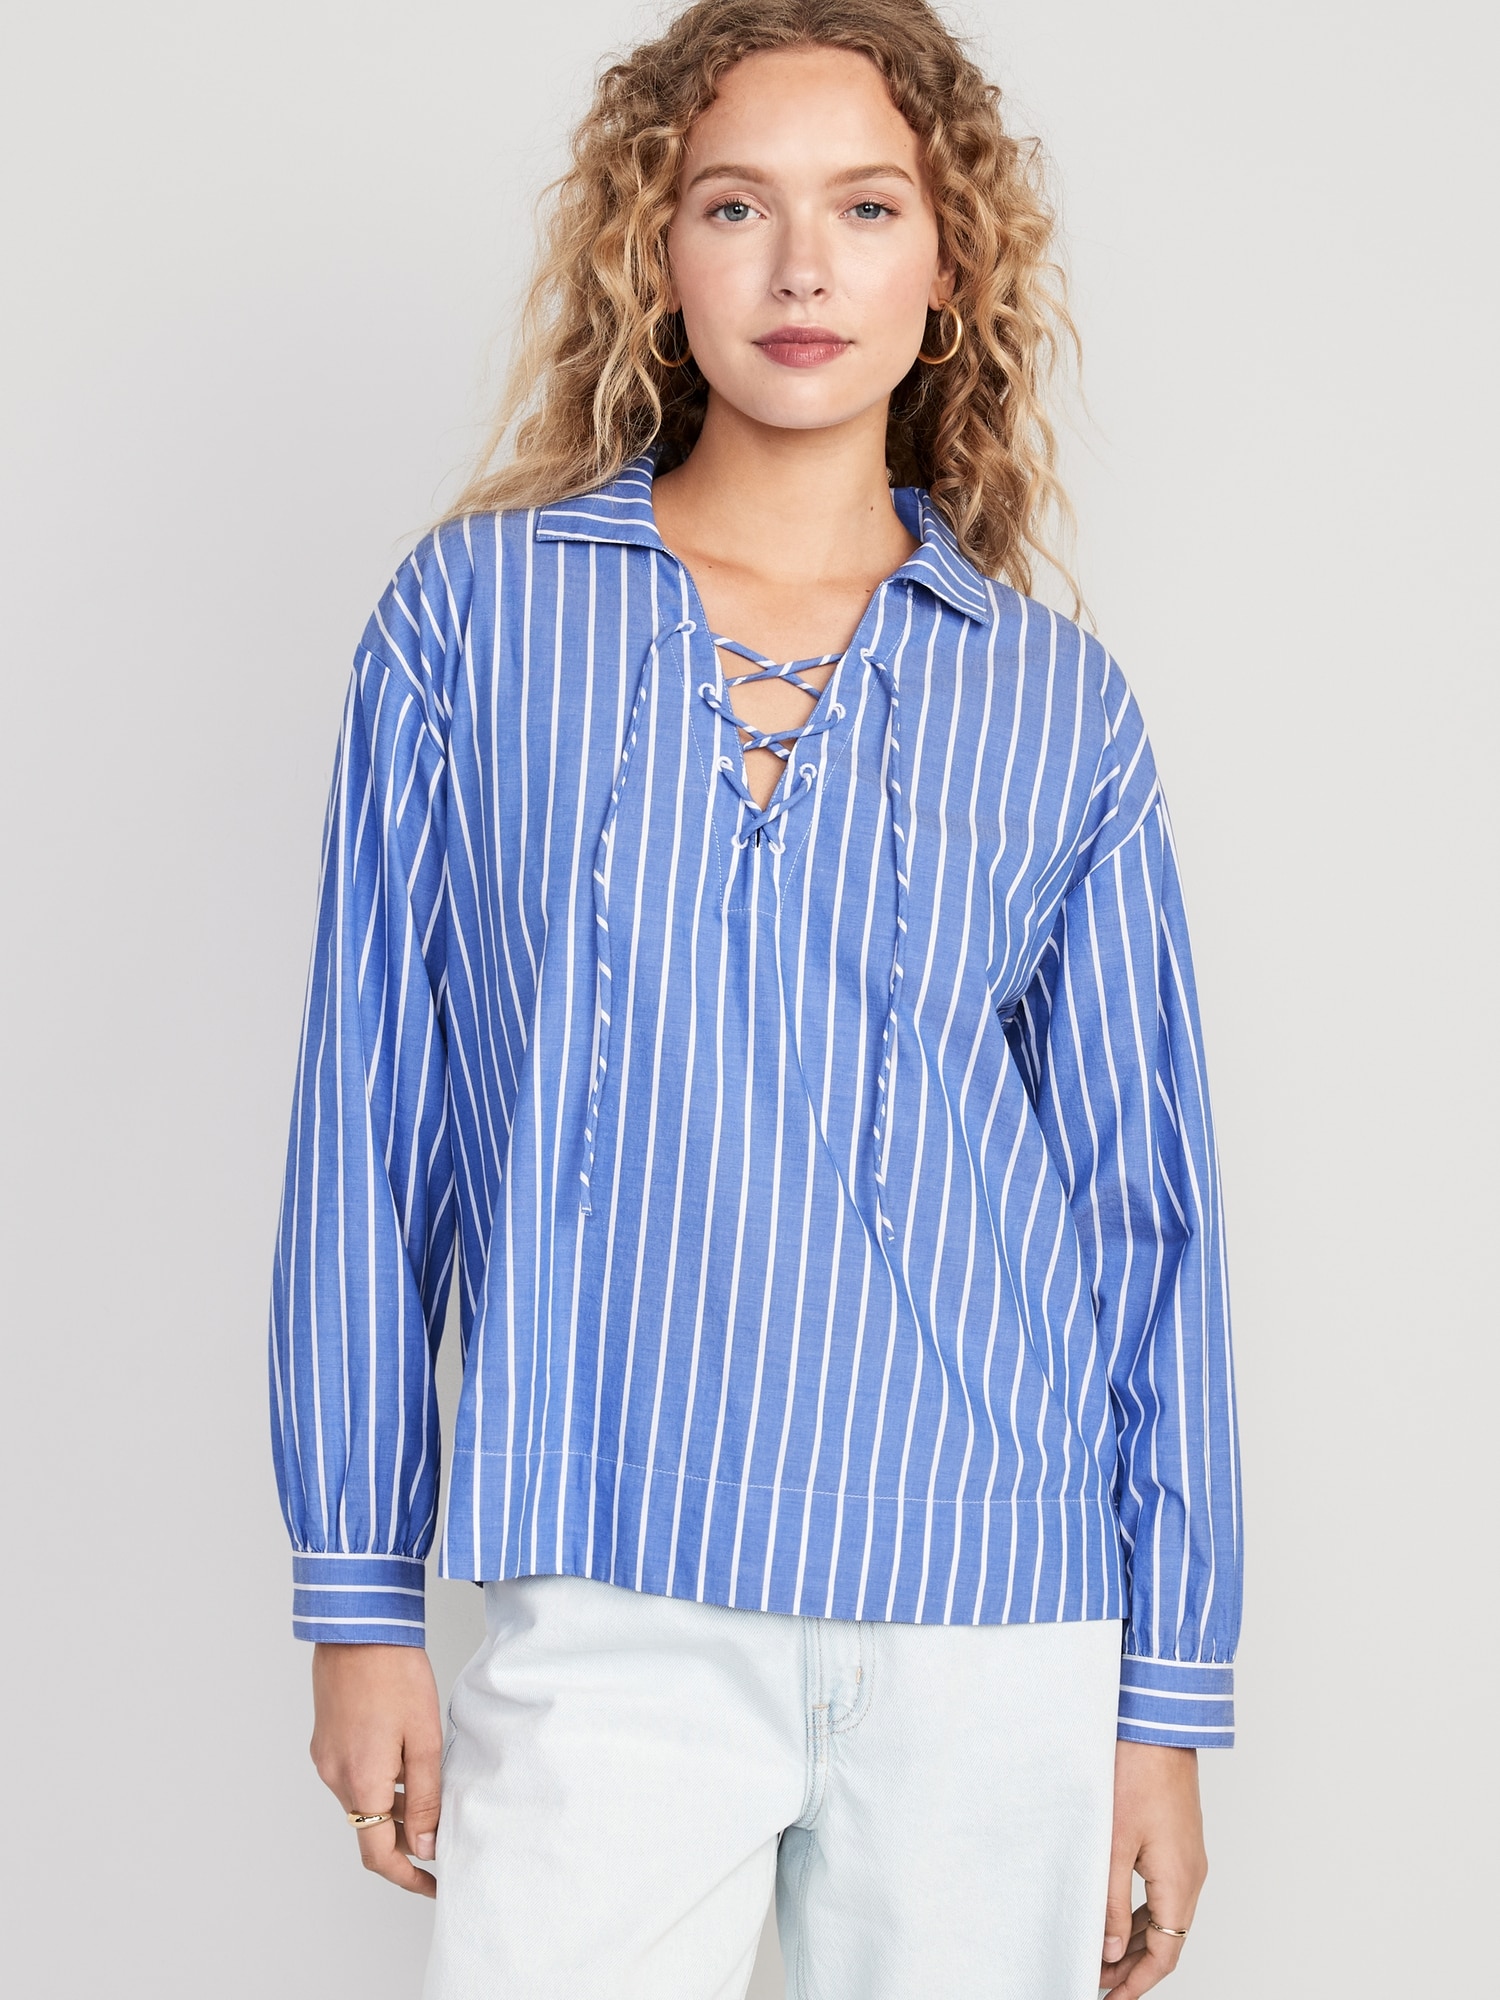 Long-Sleeve Tie-Front Notch Collar Shirt | Old Navy